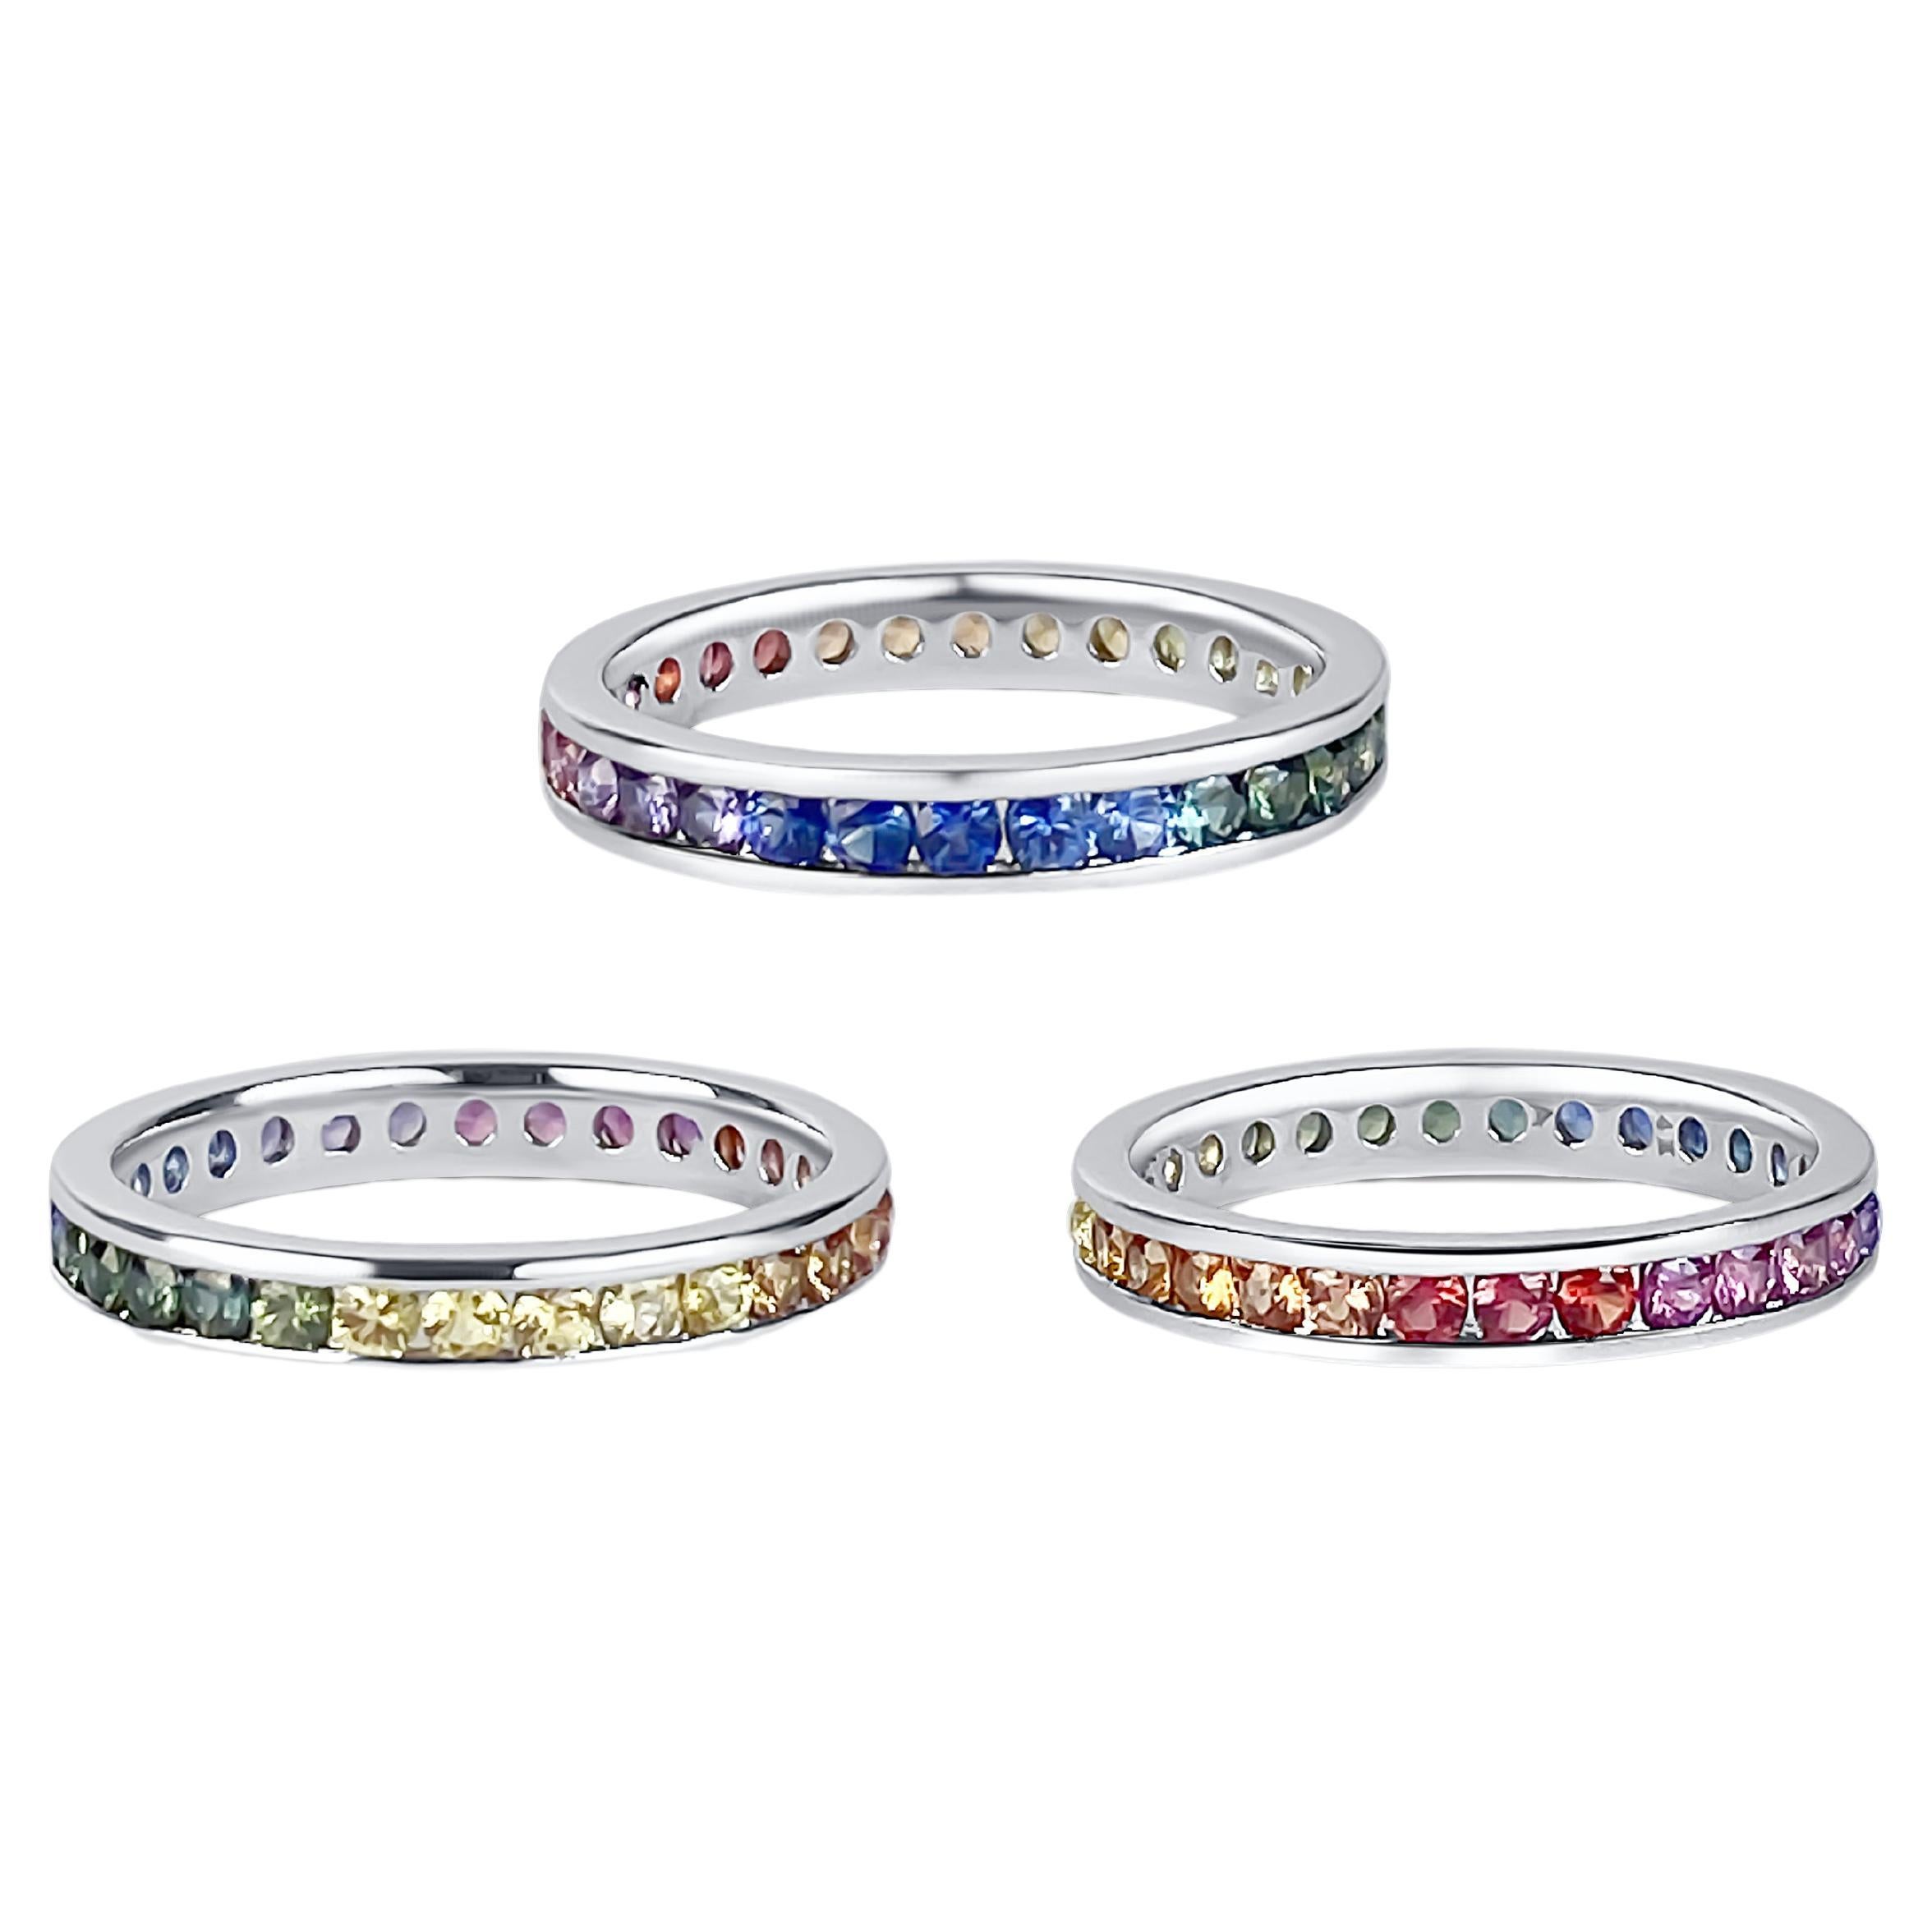 Introducing our stunning set of Ceylon natural sapphire ring and earrings, featuring a beautiful rainbow of colors that will leave you breathless. 

The ring boasts a 1.15-carat natural sapphire gemstone, with a mixed brilliant cut and eye-clean